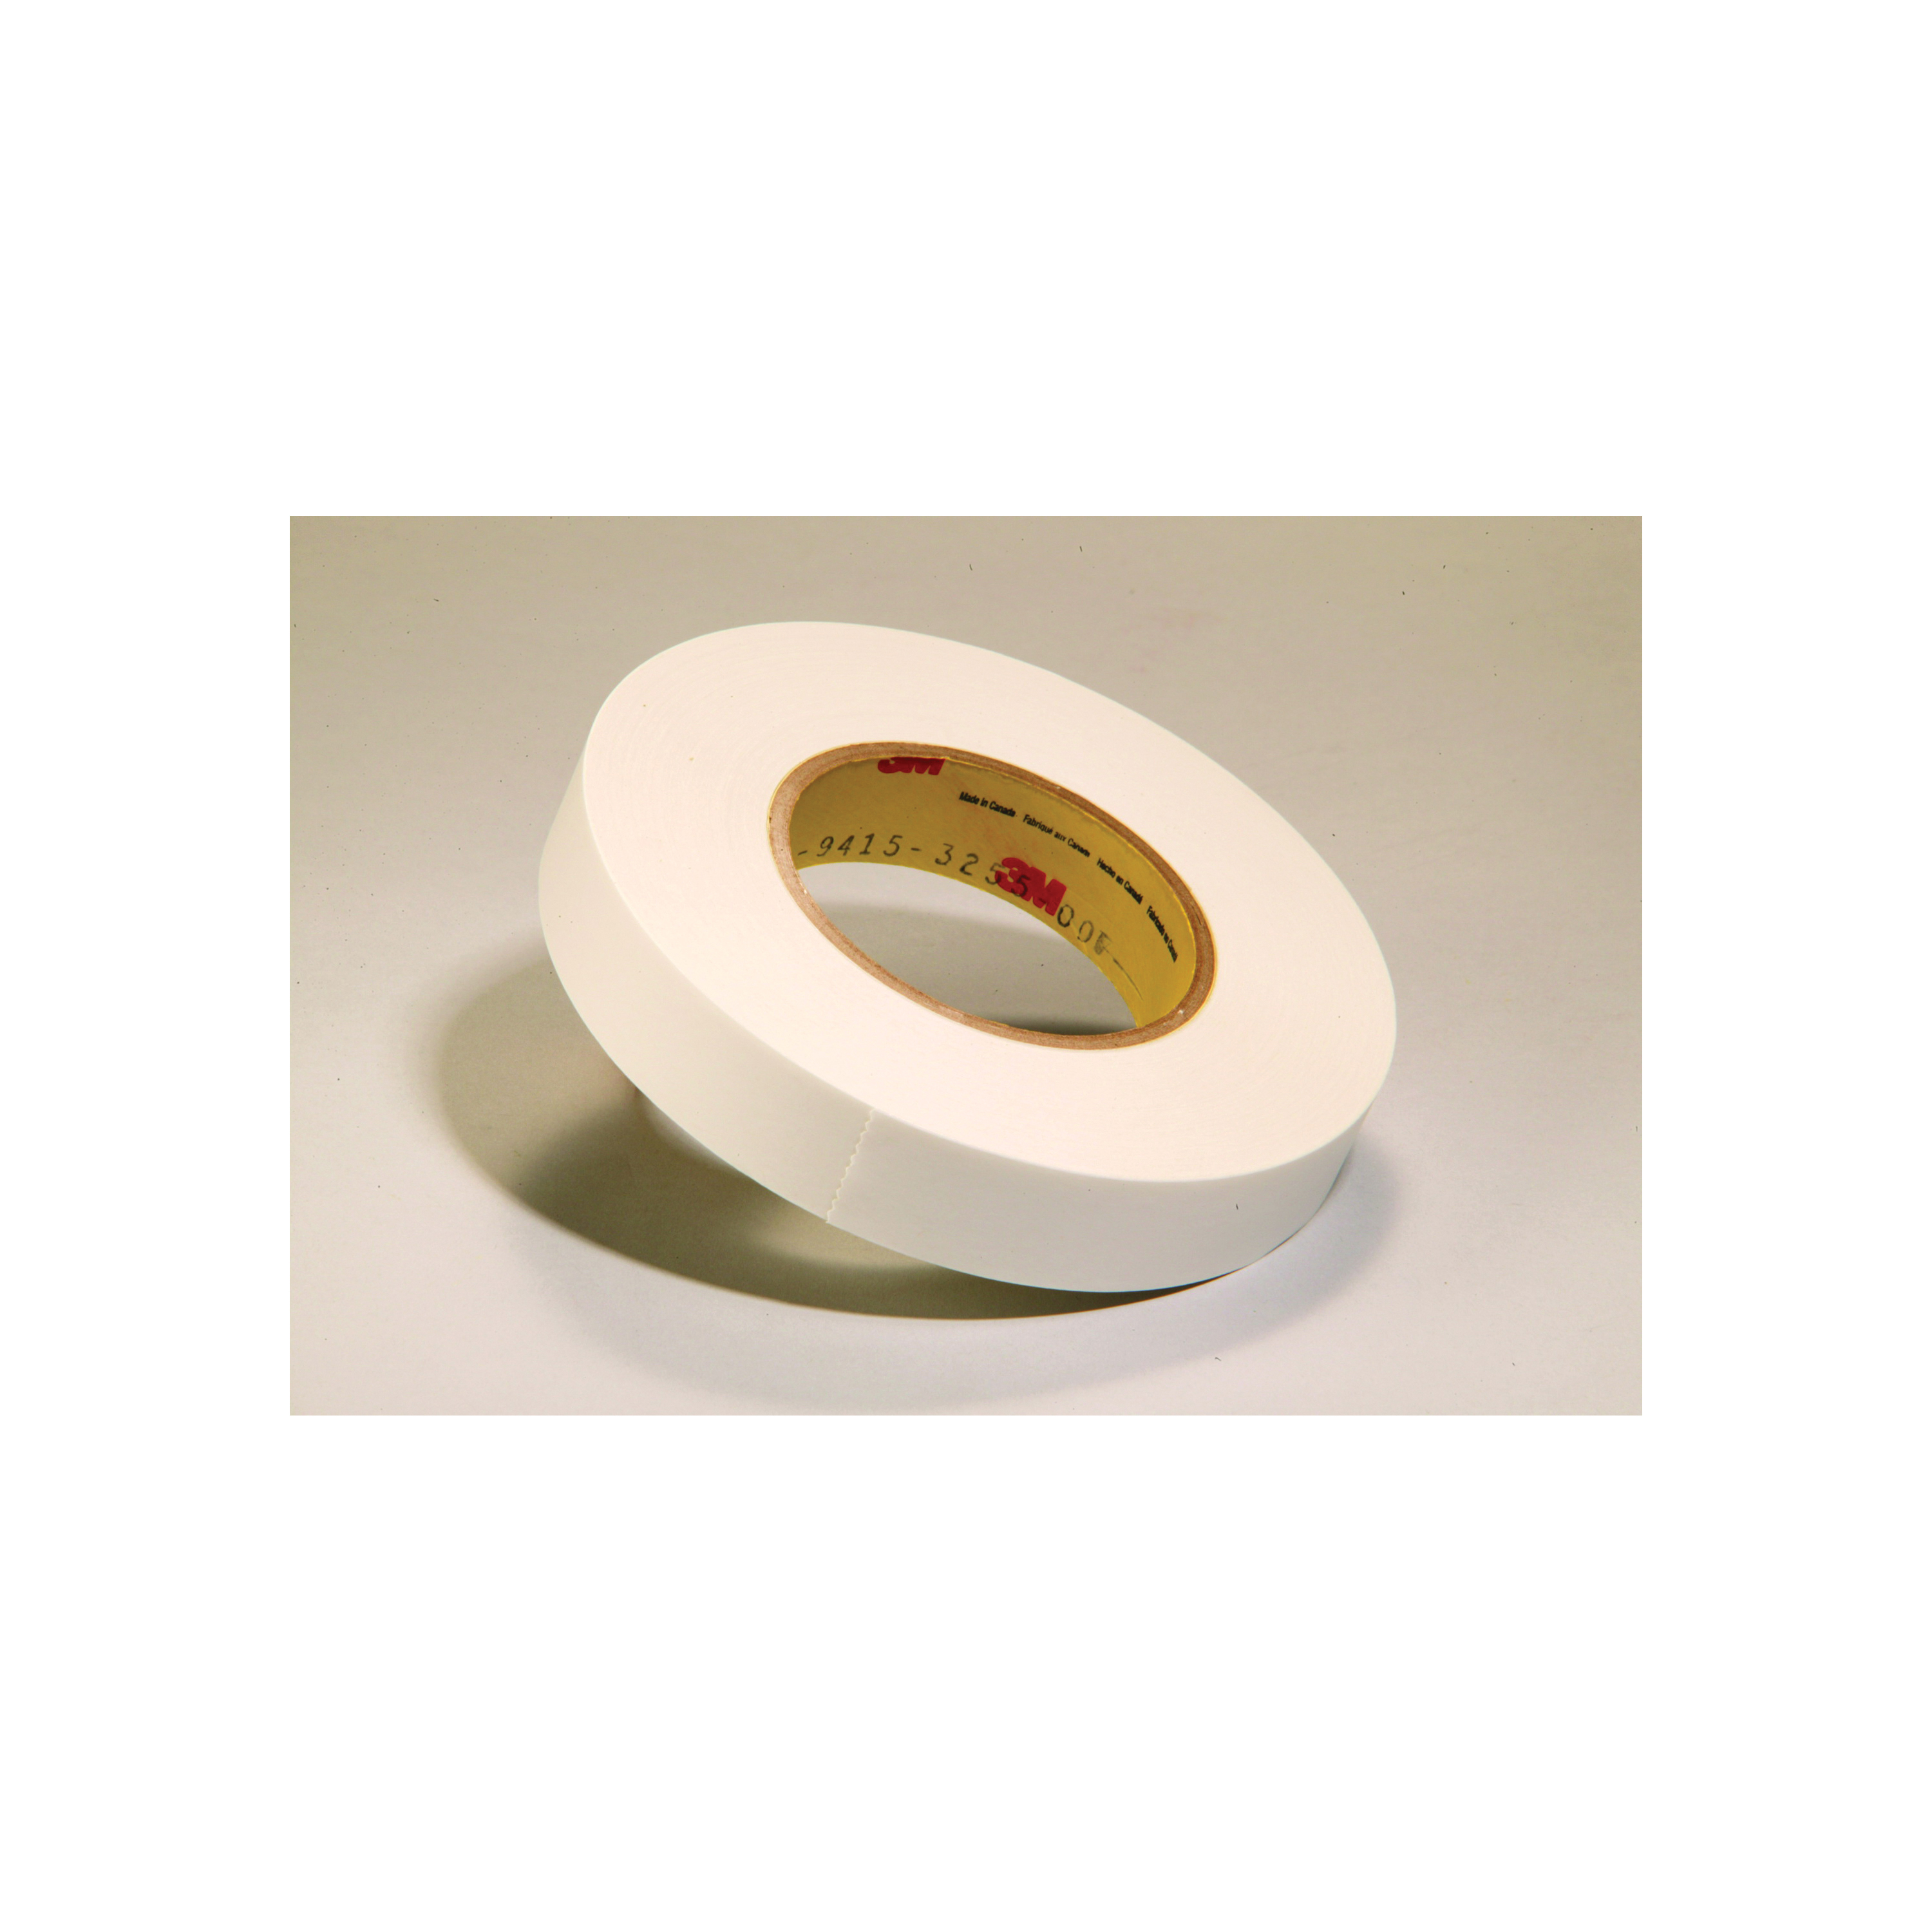 3M™ 021200-14538 Removable Repositionable Tape, 72 yd L x 1 in W, 7.6 mil THK, 0.5 mil 400 Acrylic Adhesive, Polyester Film Backing, Clear